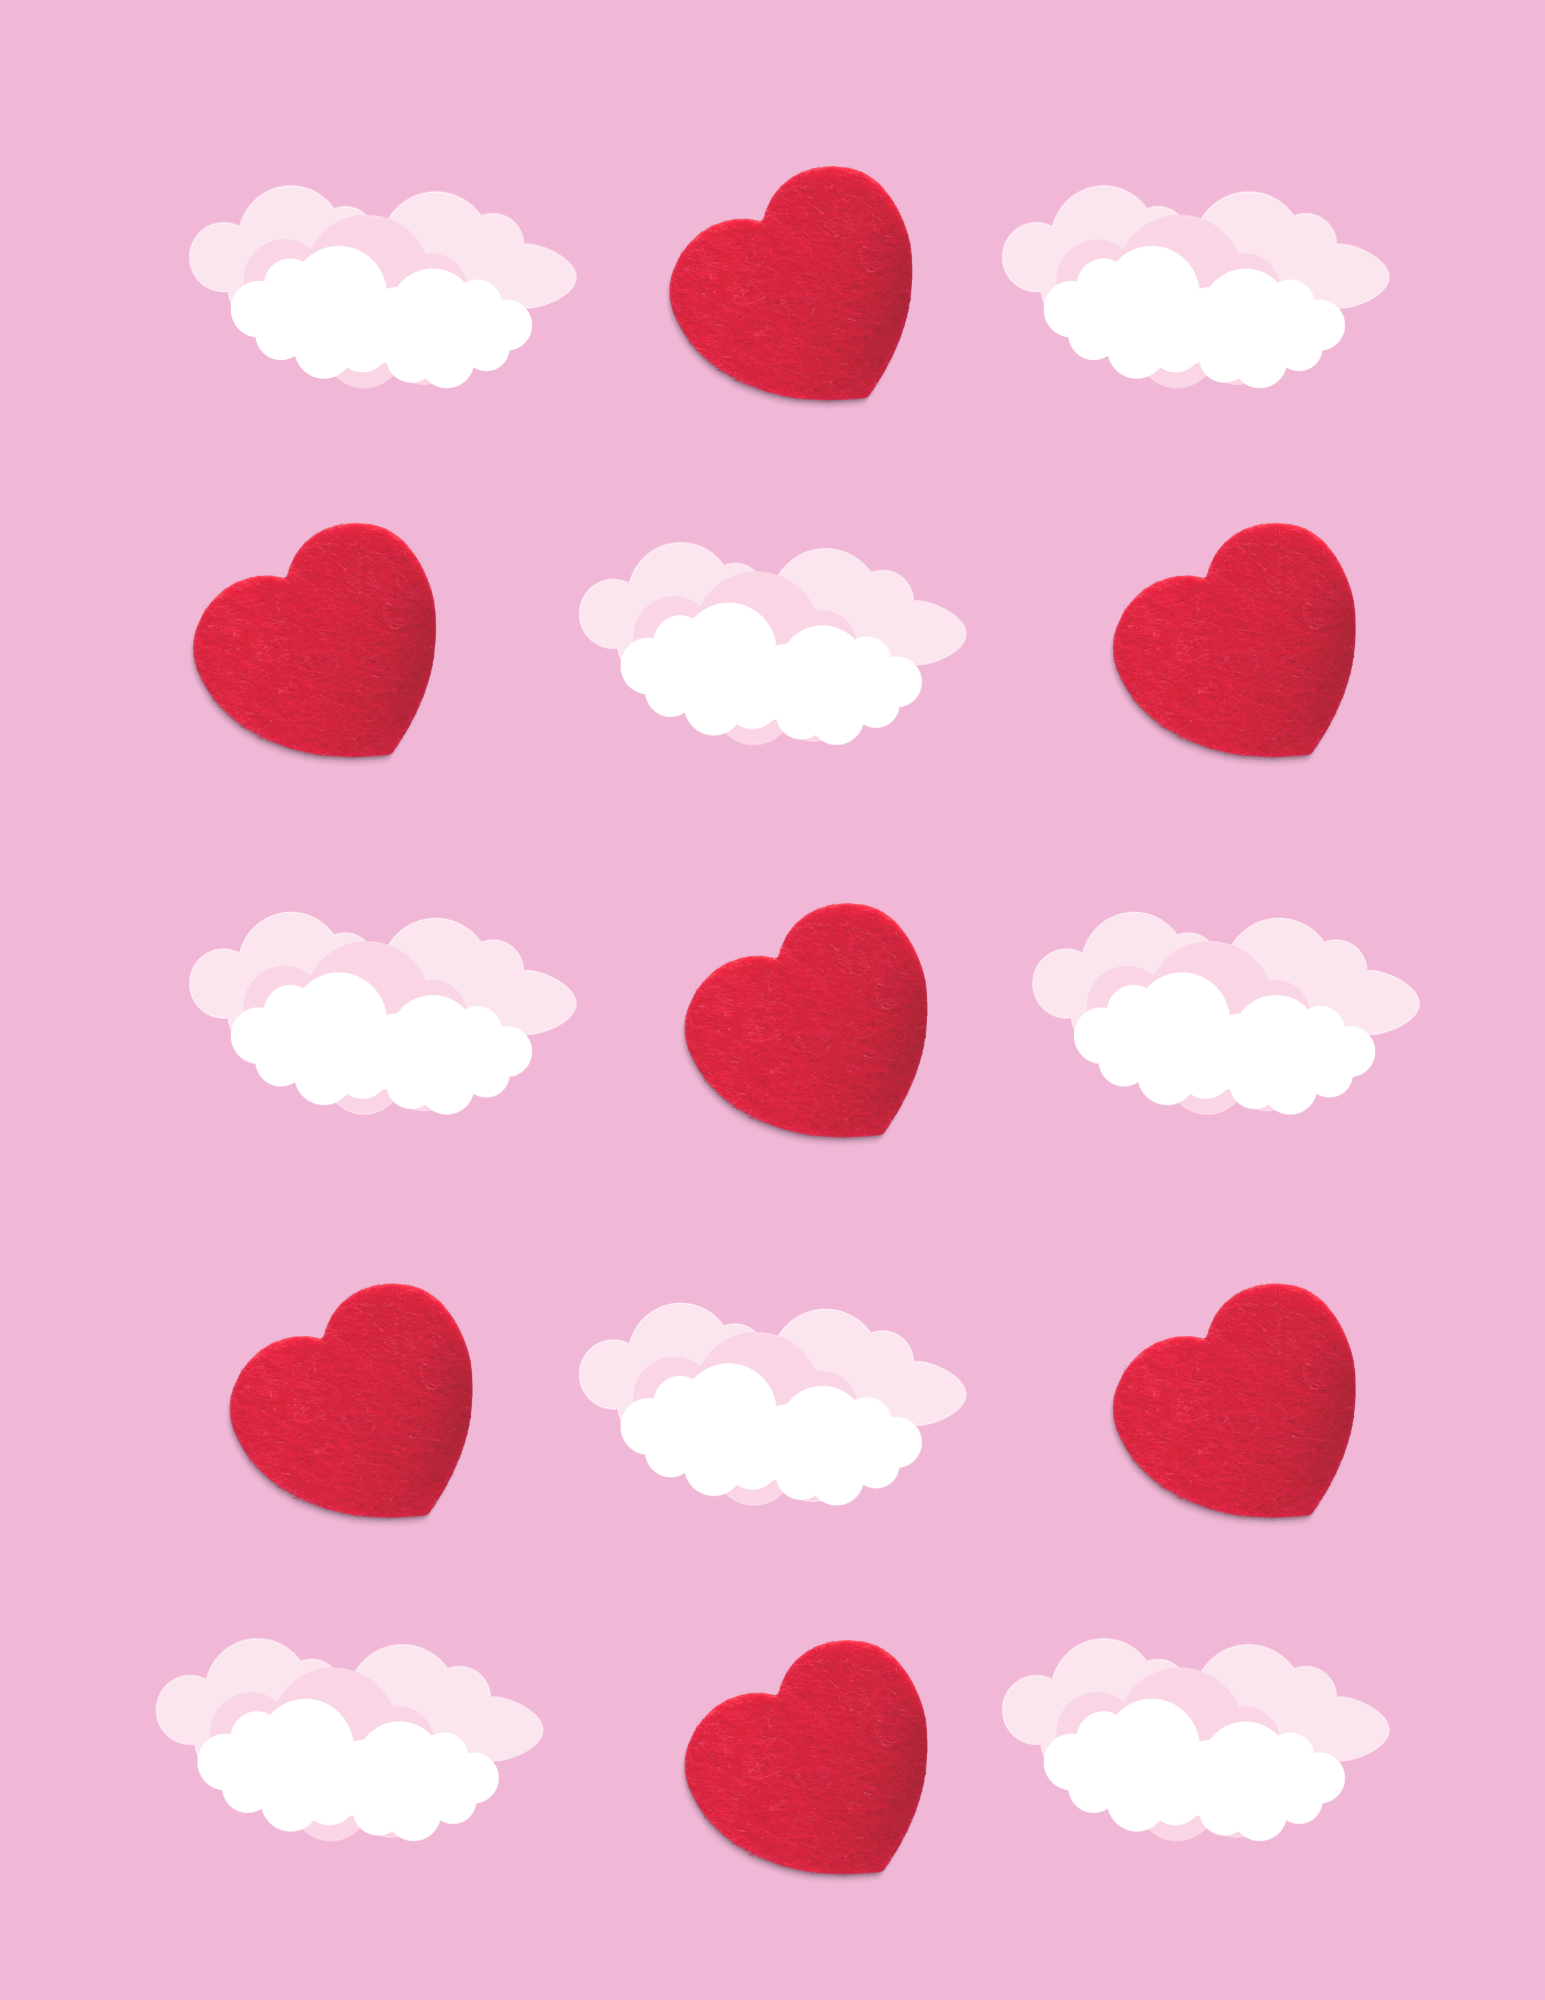 Pink background with clouds and red hearts.